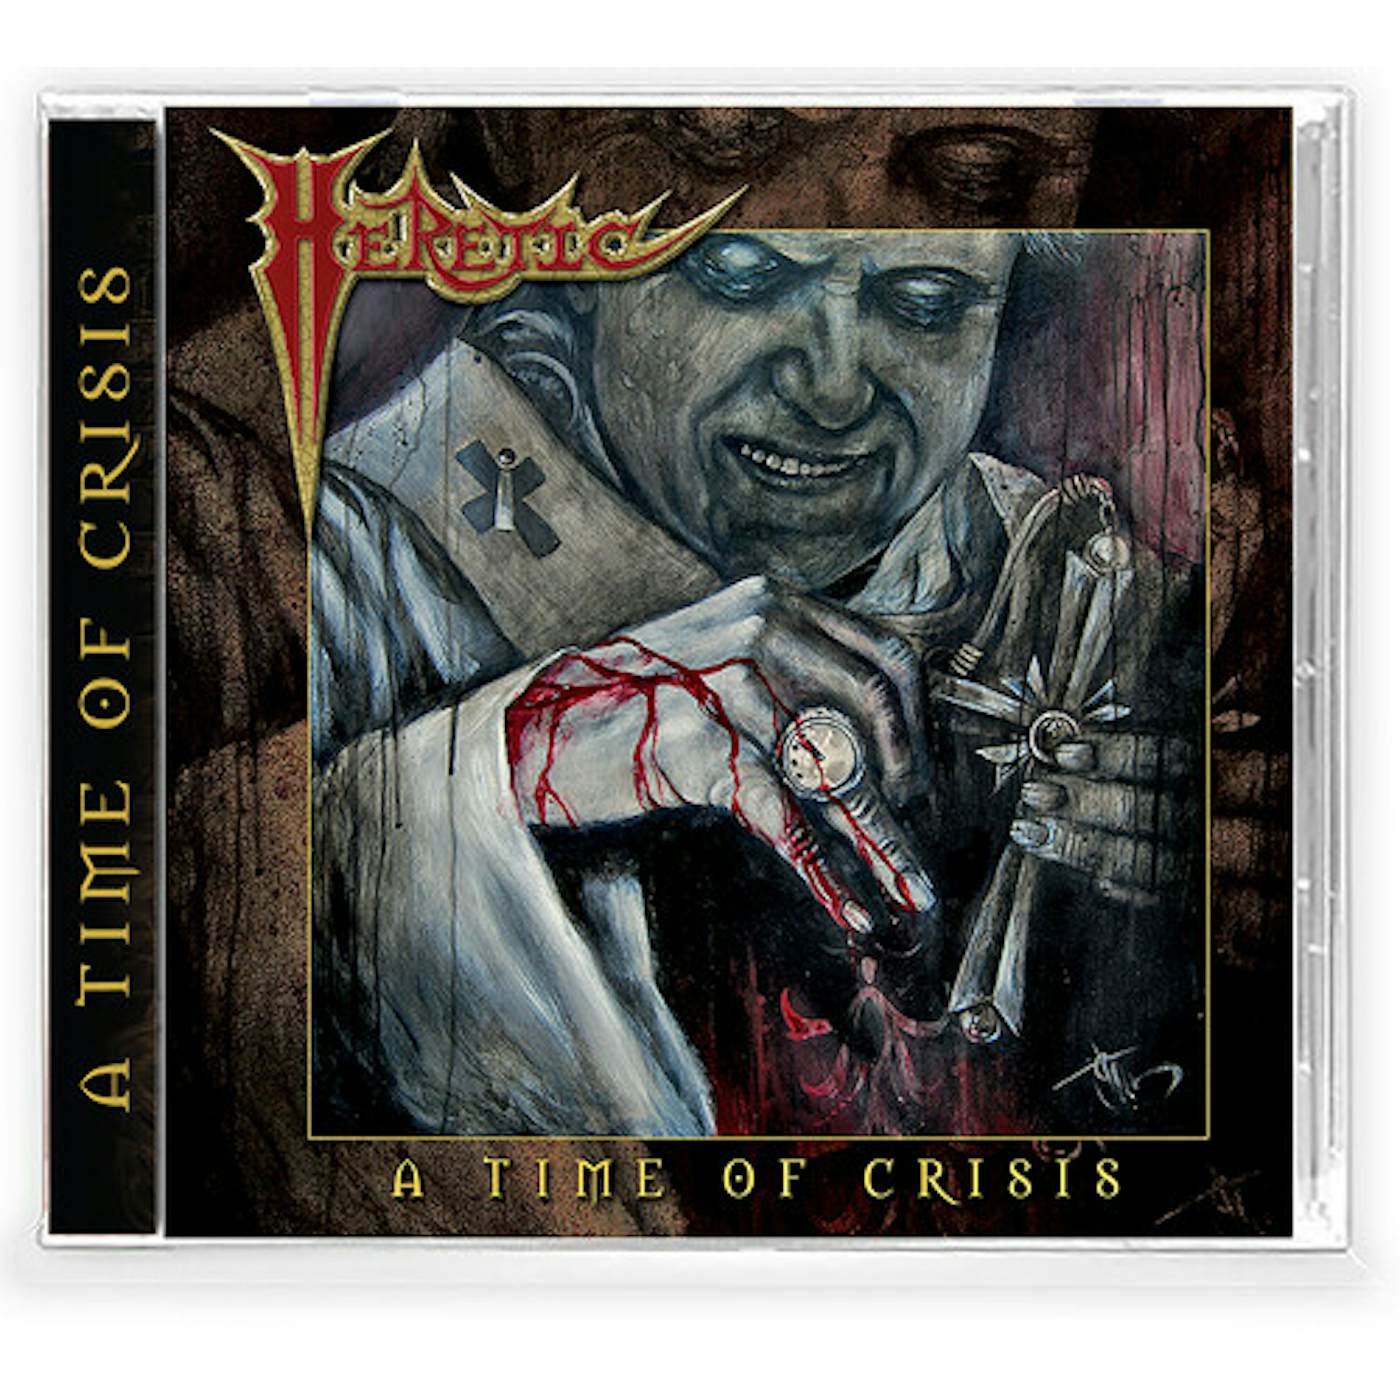 Heretic TIME OF CRISIS CD